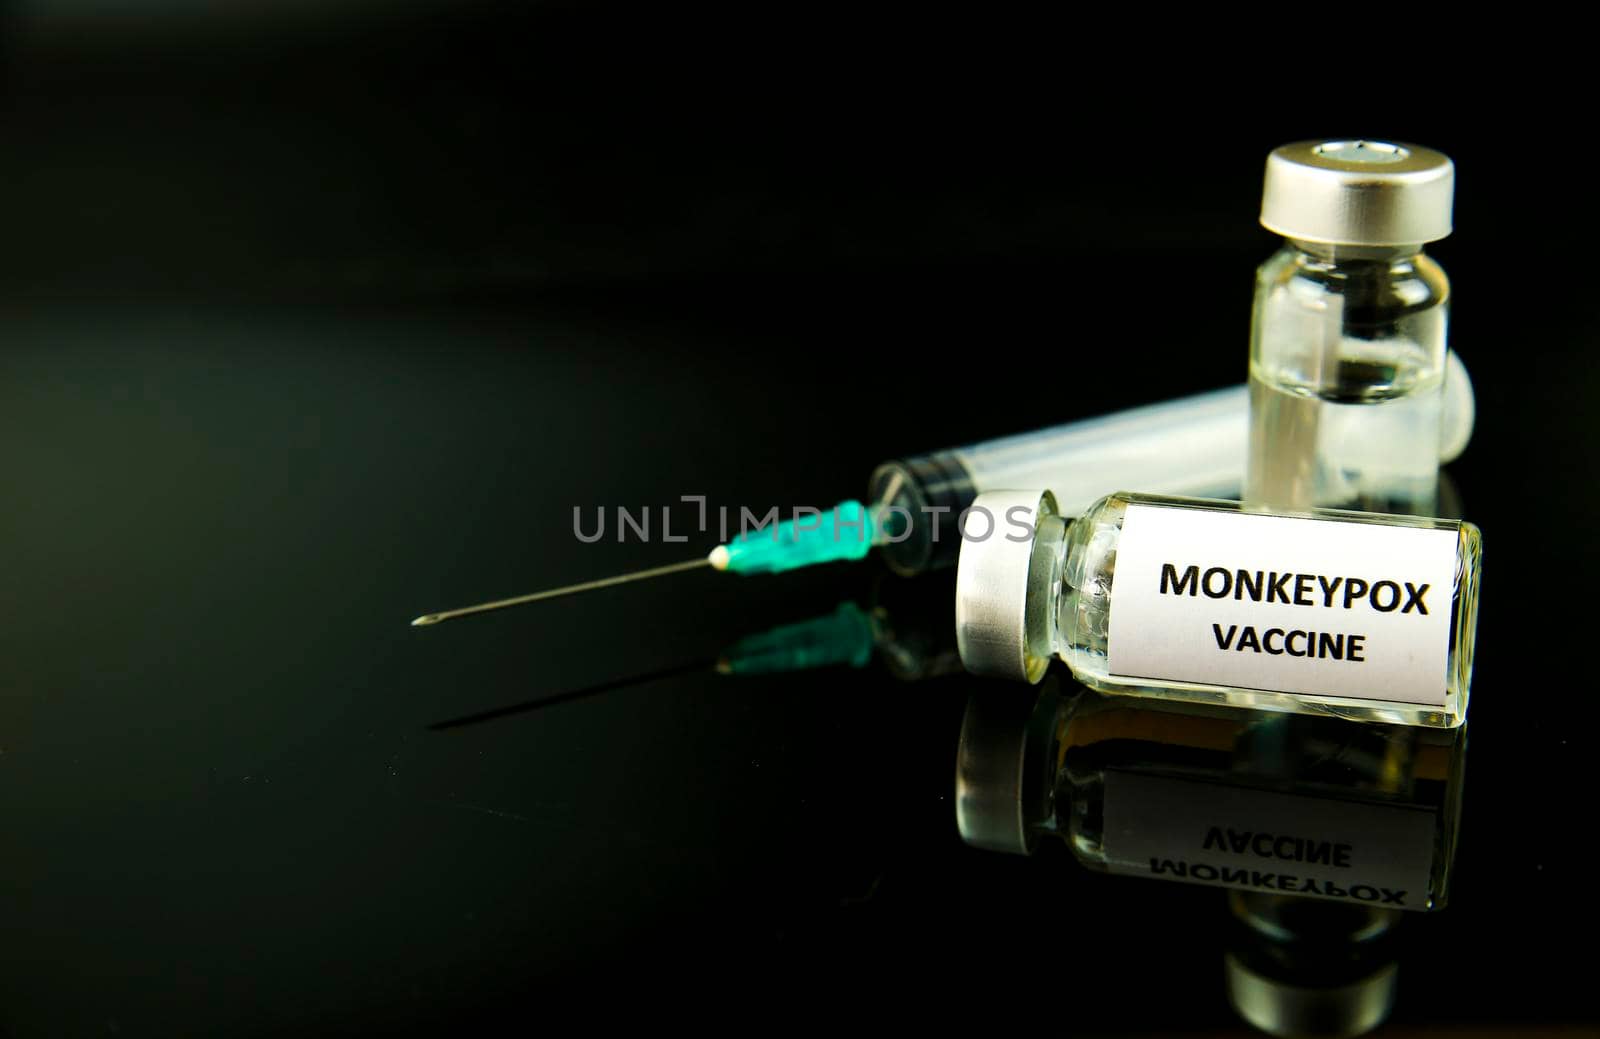 Vials filled and syringe with Monkeypox vaccine by soniabonet